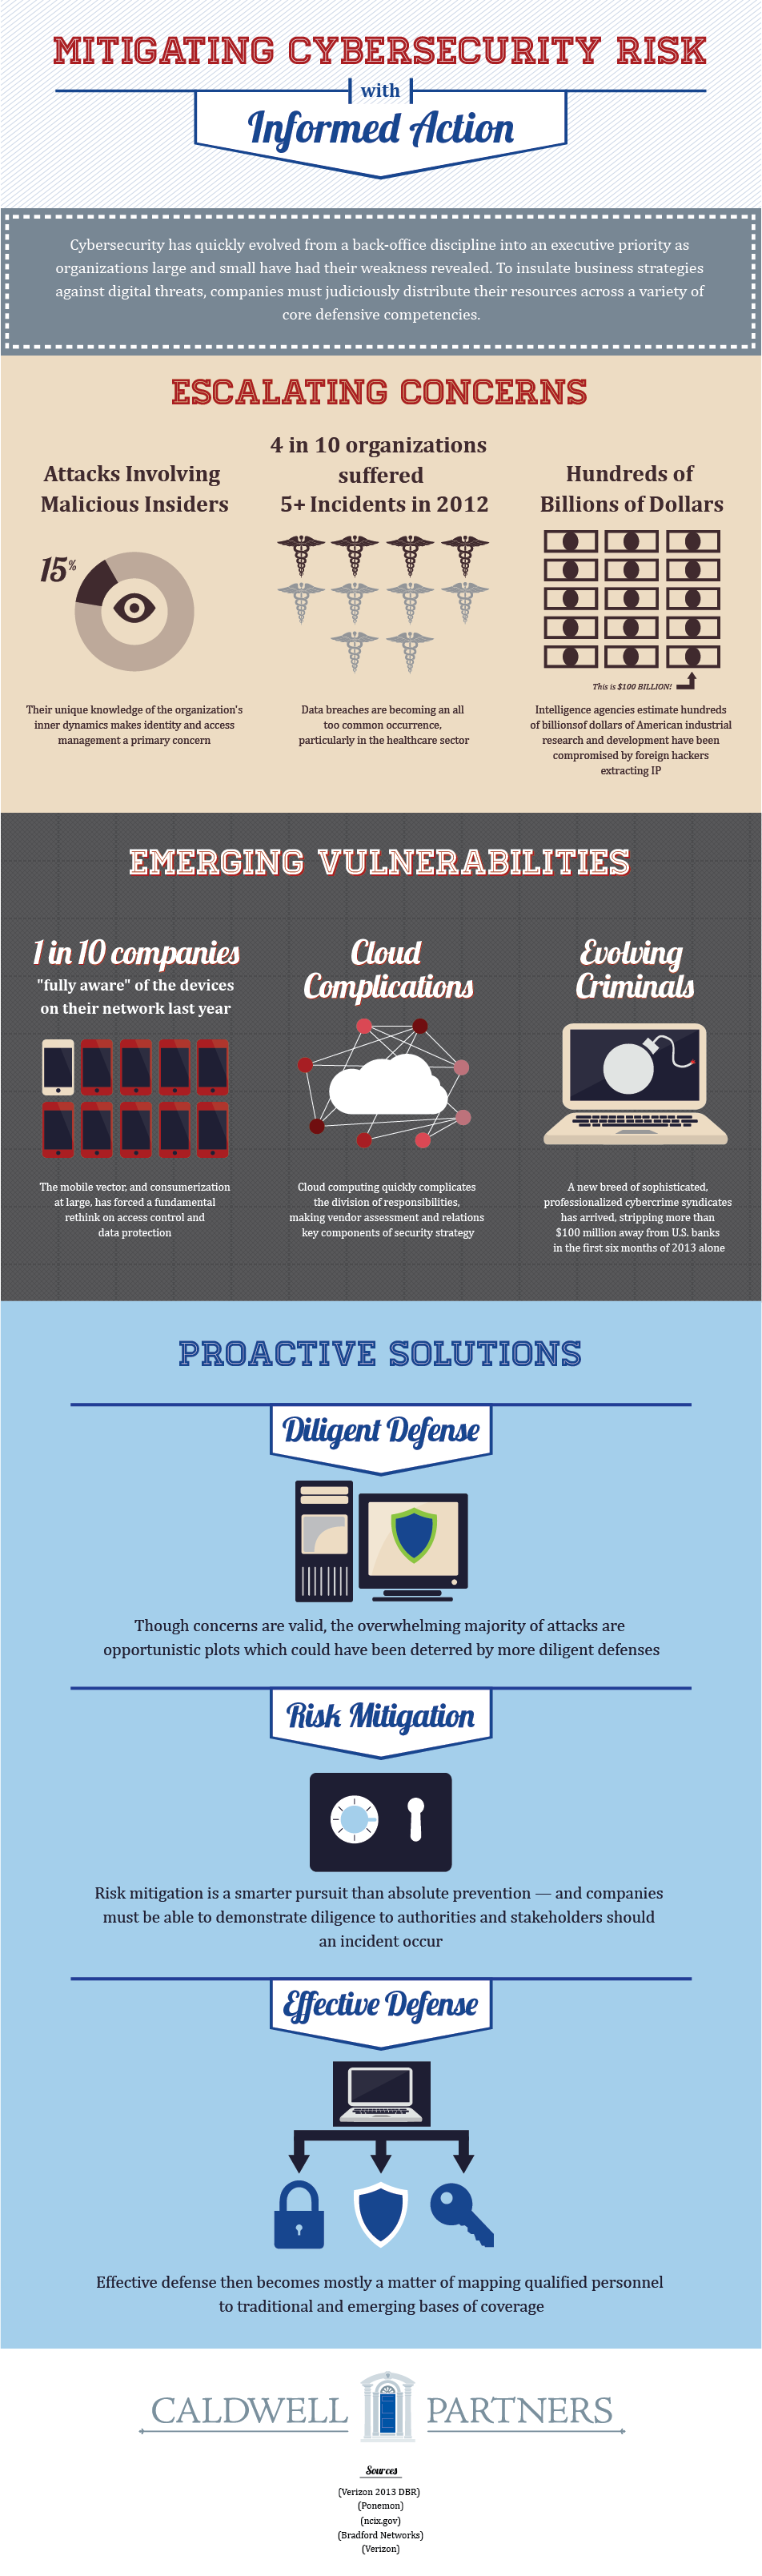 Infographic: Mitigating Cybersecurity Risk with Informed Action